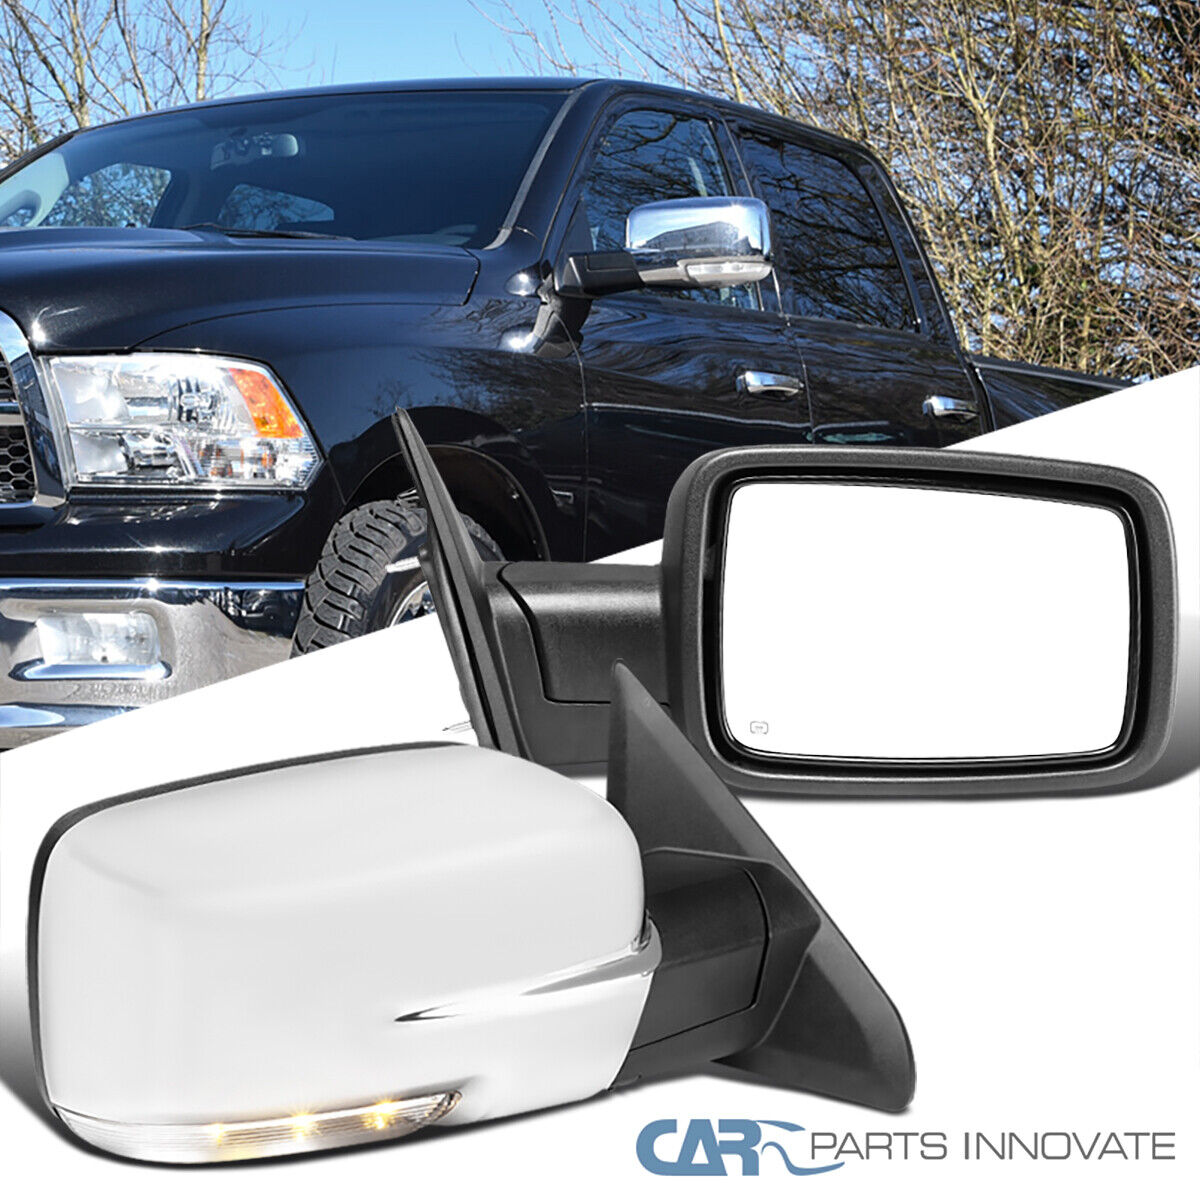 Fits 09-12 Dodge Ram 1500 Chrome Power Heat Side Mirrors Pair+LED Signal+Puddle